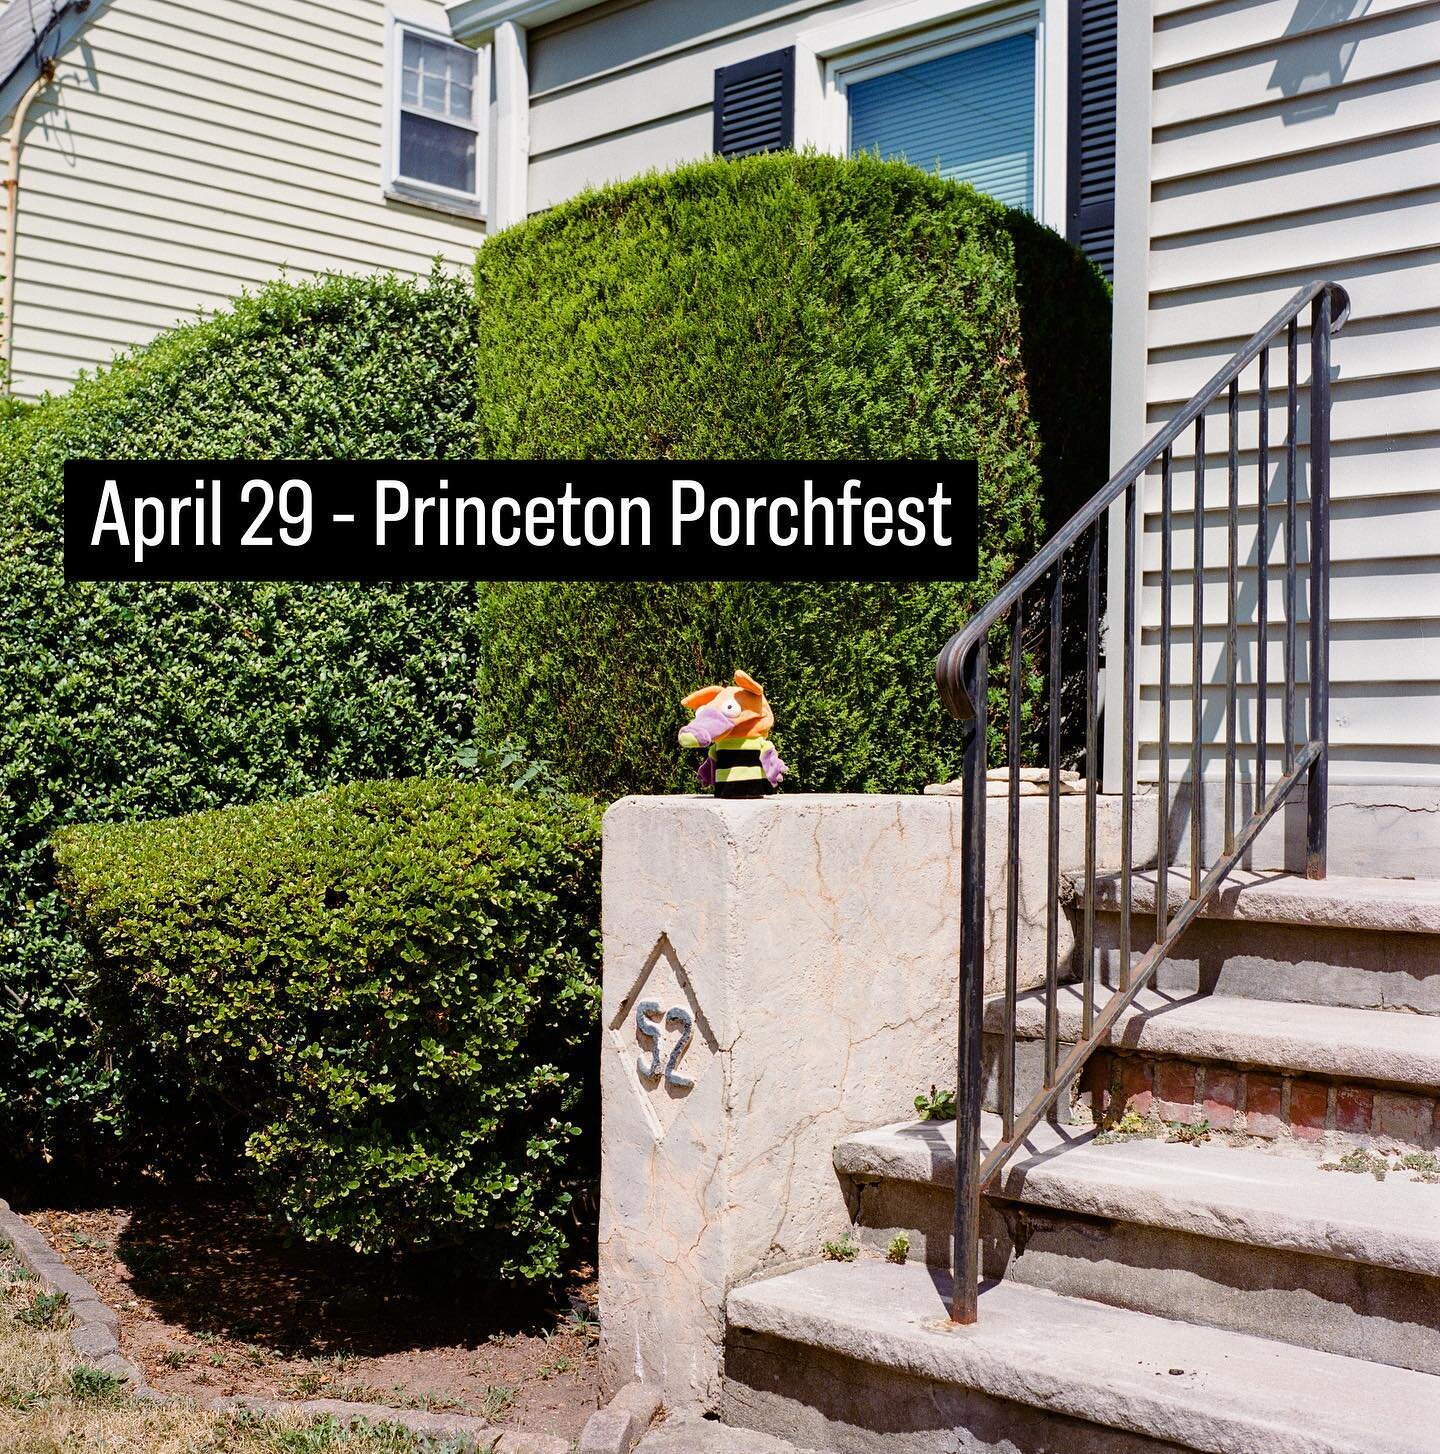 This gonna be me on April 29th. 

Very excited to be playing the Princeton Porchfest again! Had a great time and met some awesome people last year.

Our set is at 1pm over at 45 Linden Lane if you want to stop by!

#livemusic #porchfest #originalmusi